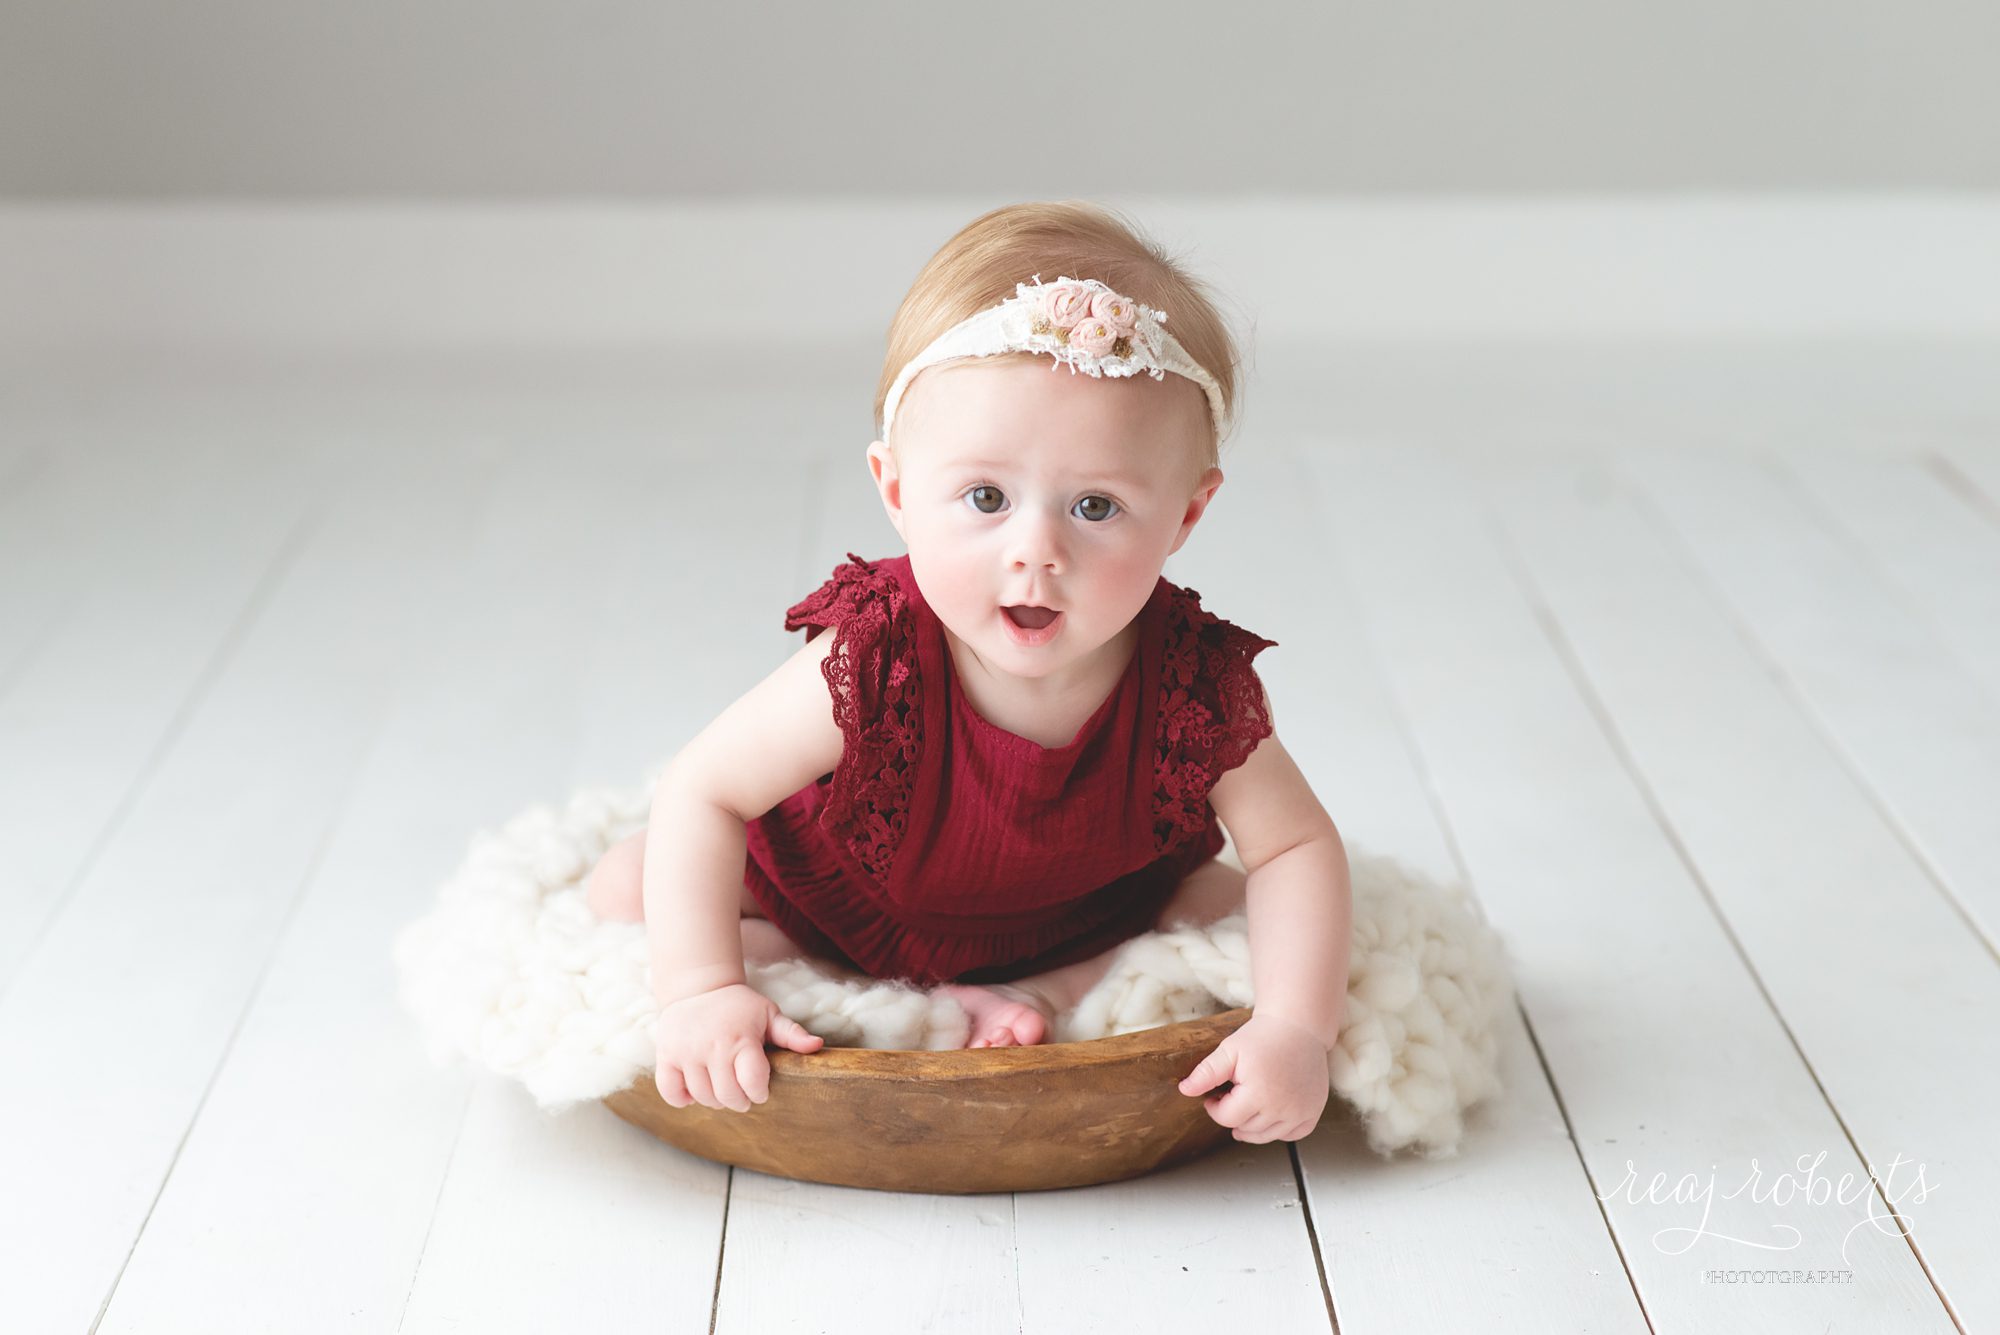 6 month baby girl in cranberry red romper in bowl, baby Christmas photo ideas | Reaj Roberts Photography